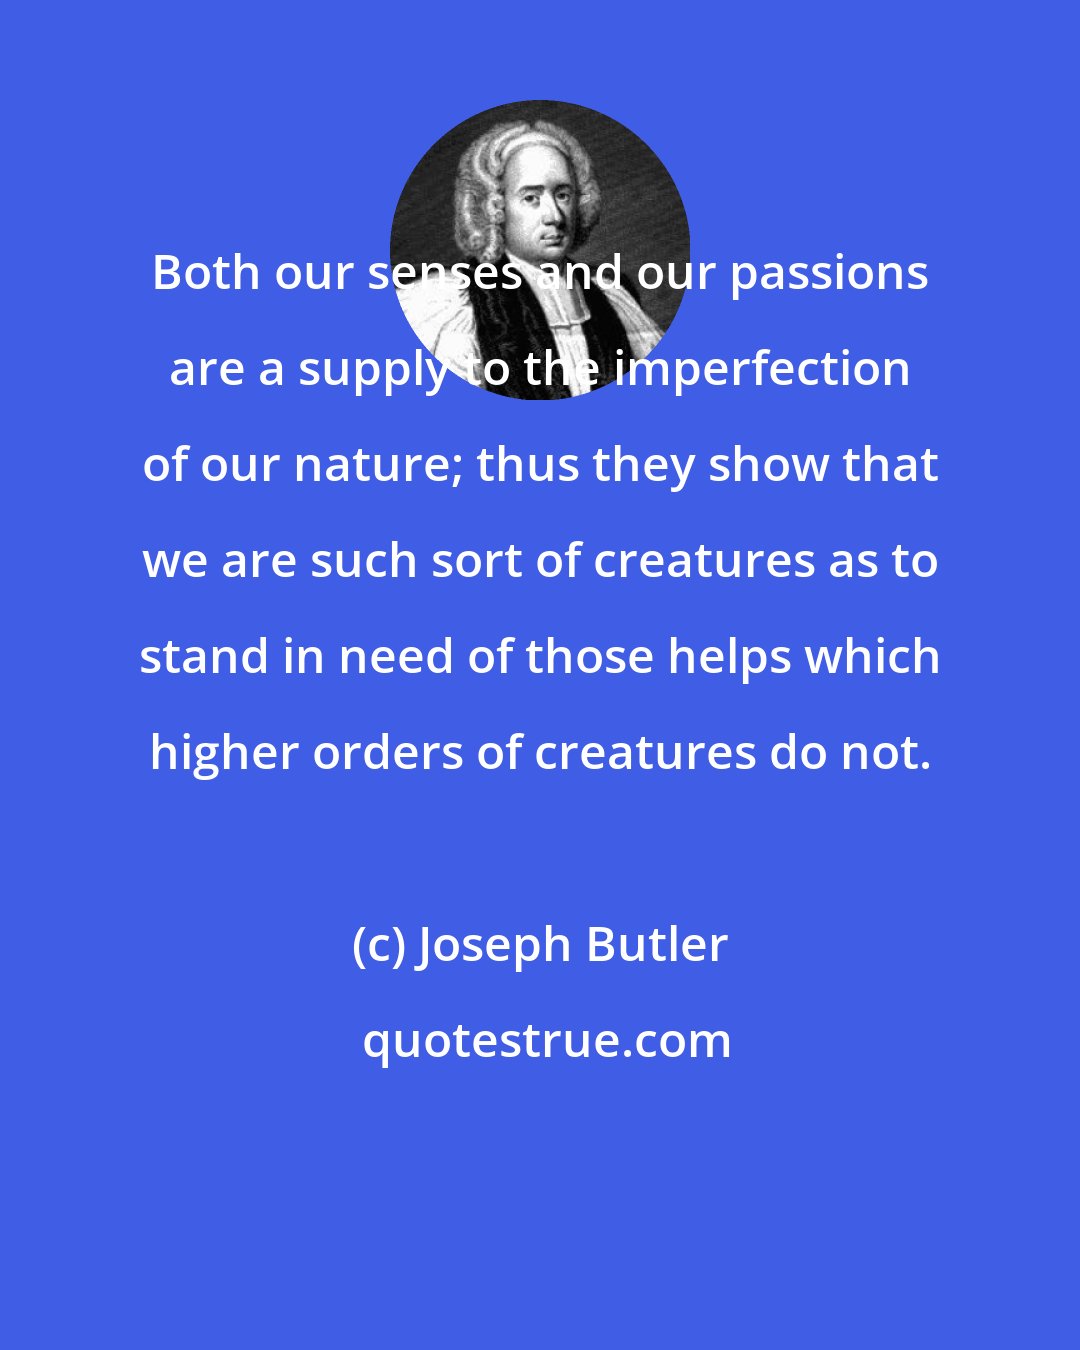 Joseph Butler: Both our senses and our passions are a supply to the imperfection of our nature; thus they show that we are such sort of creatures as to stand in need of those helps which higher orders of creatures do not.